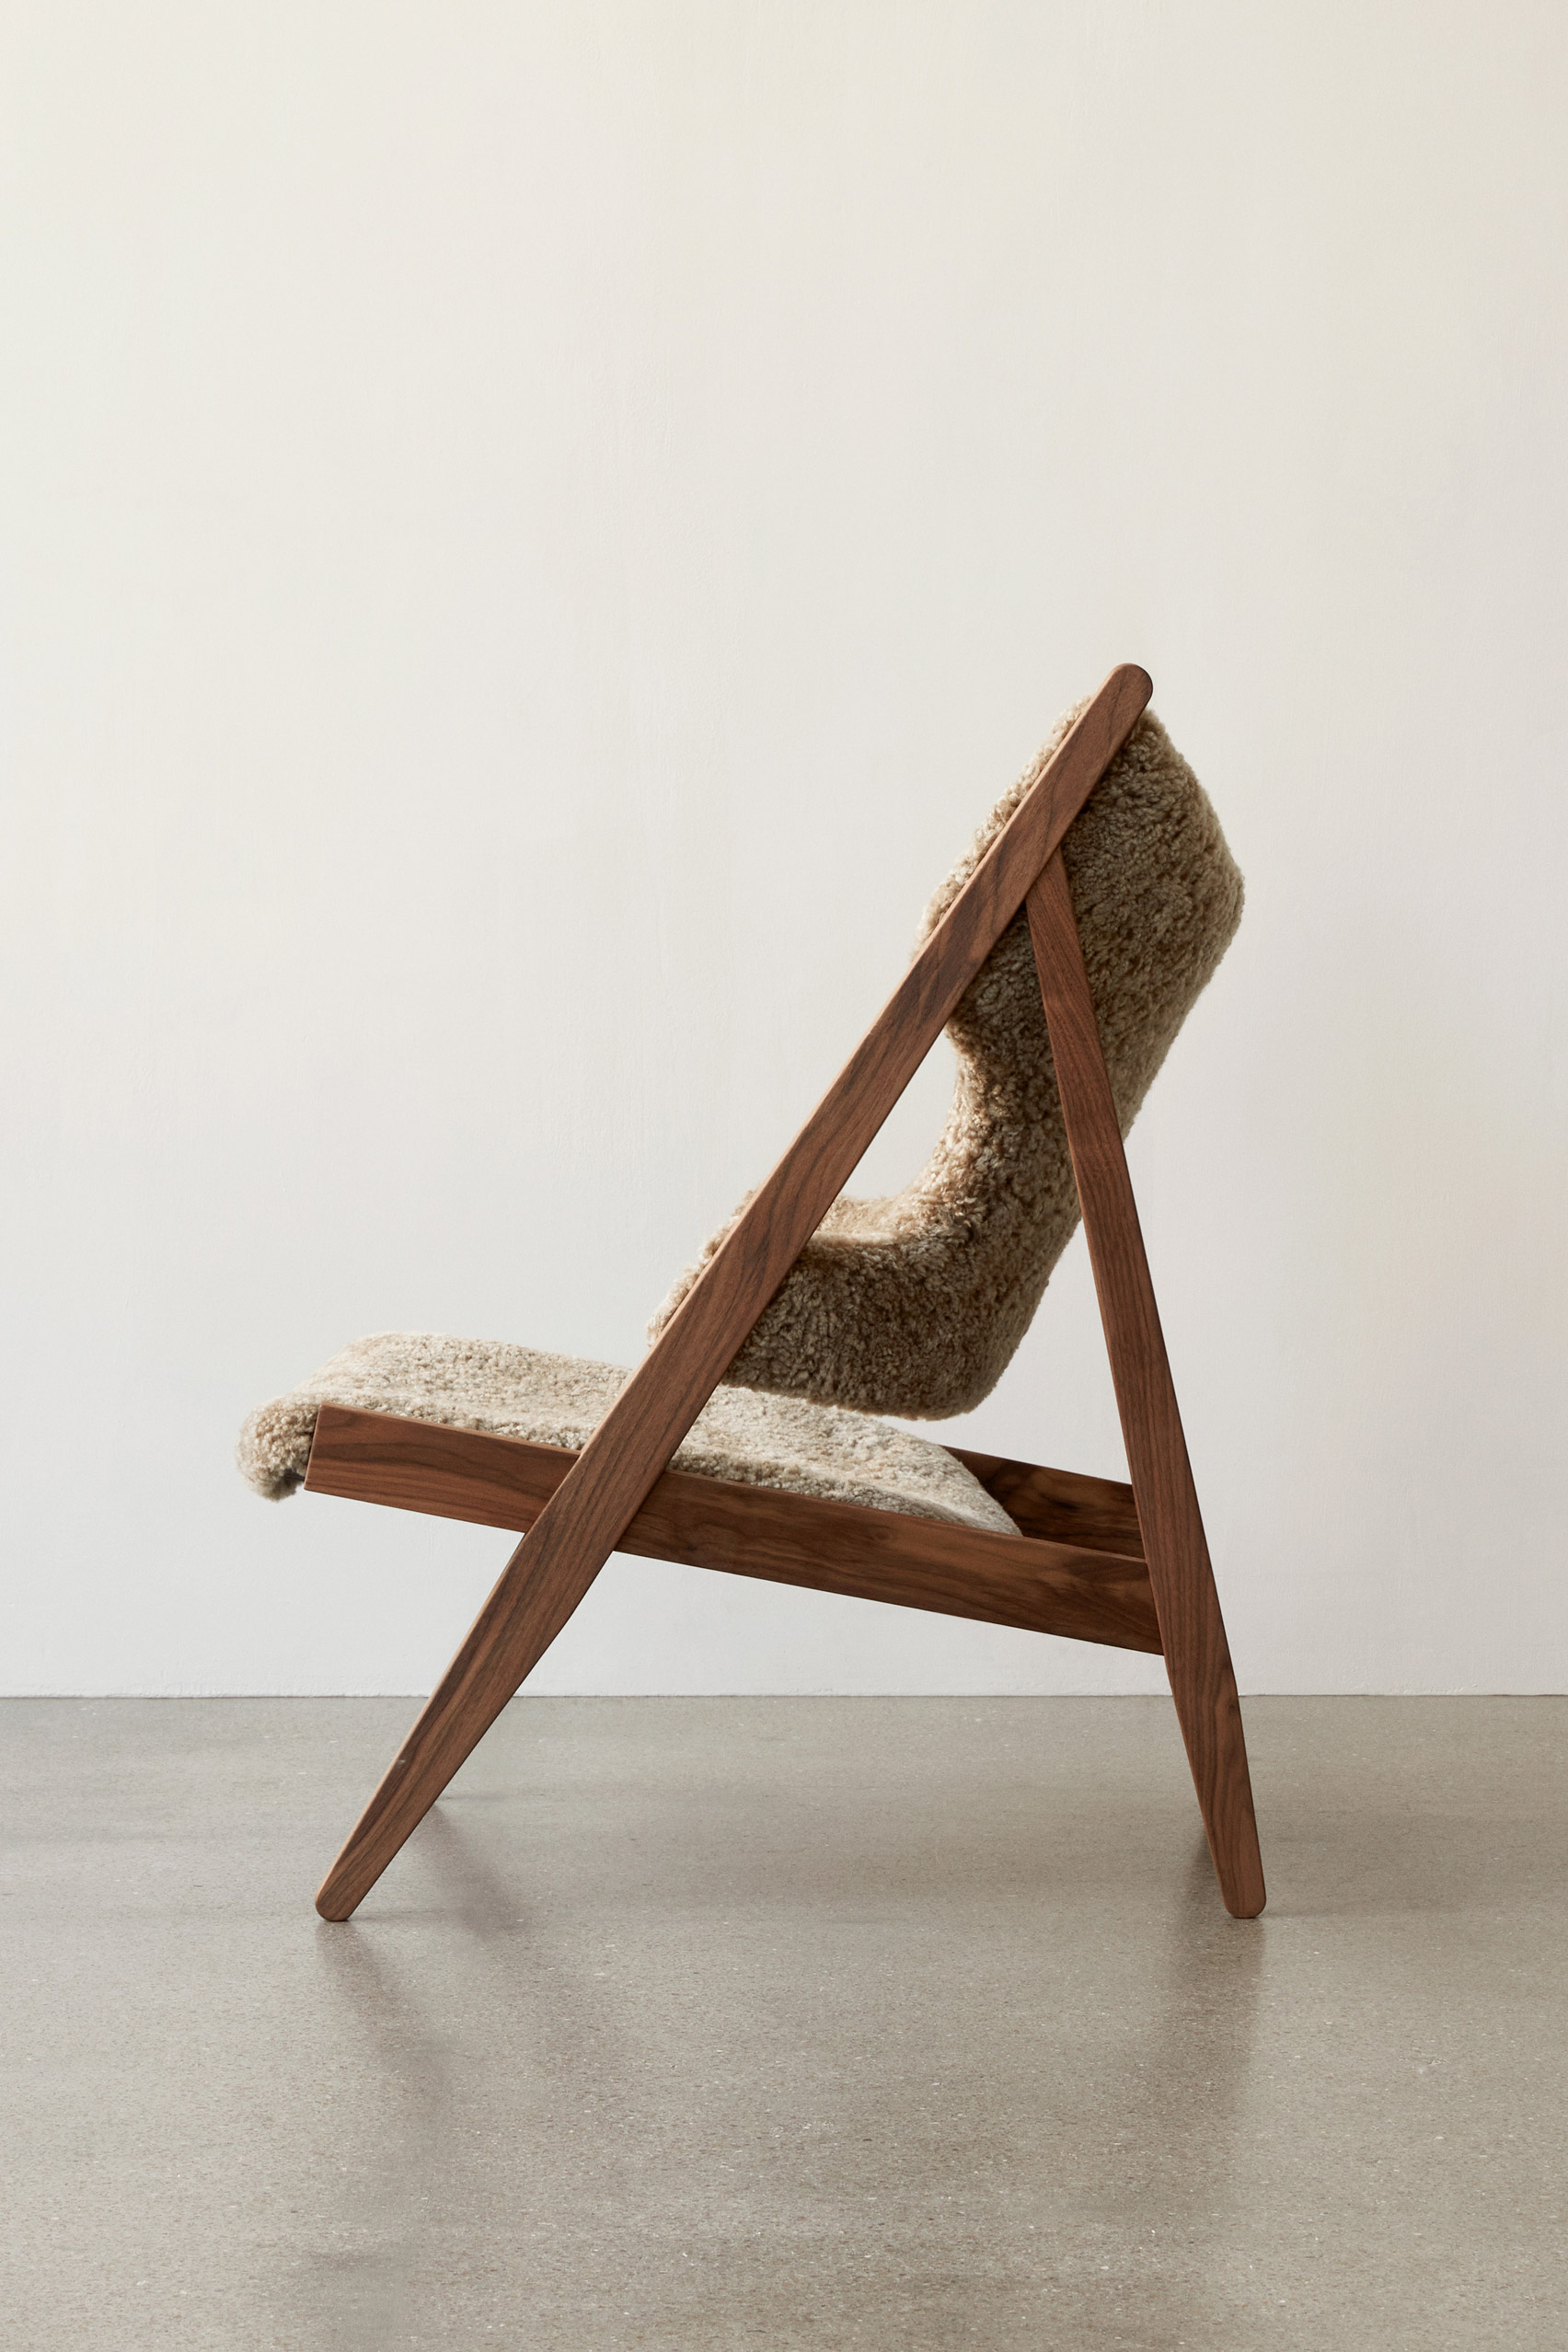 The side profile of a Knitting lounge chair